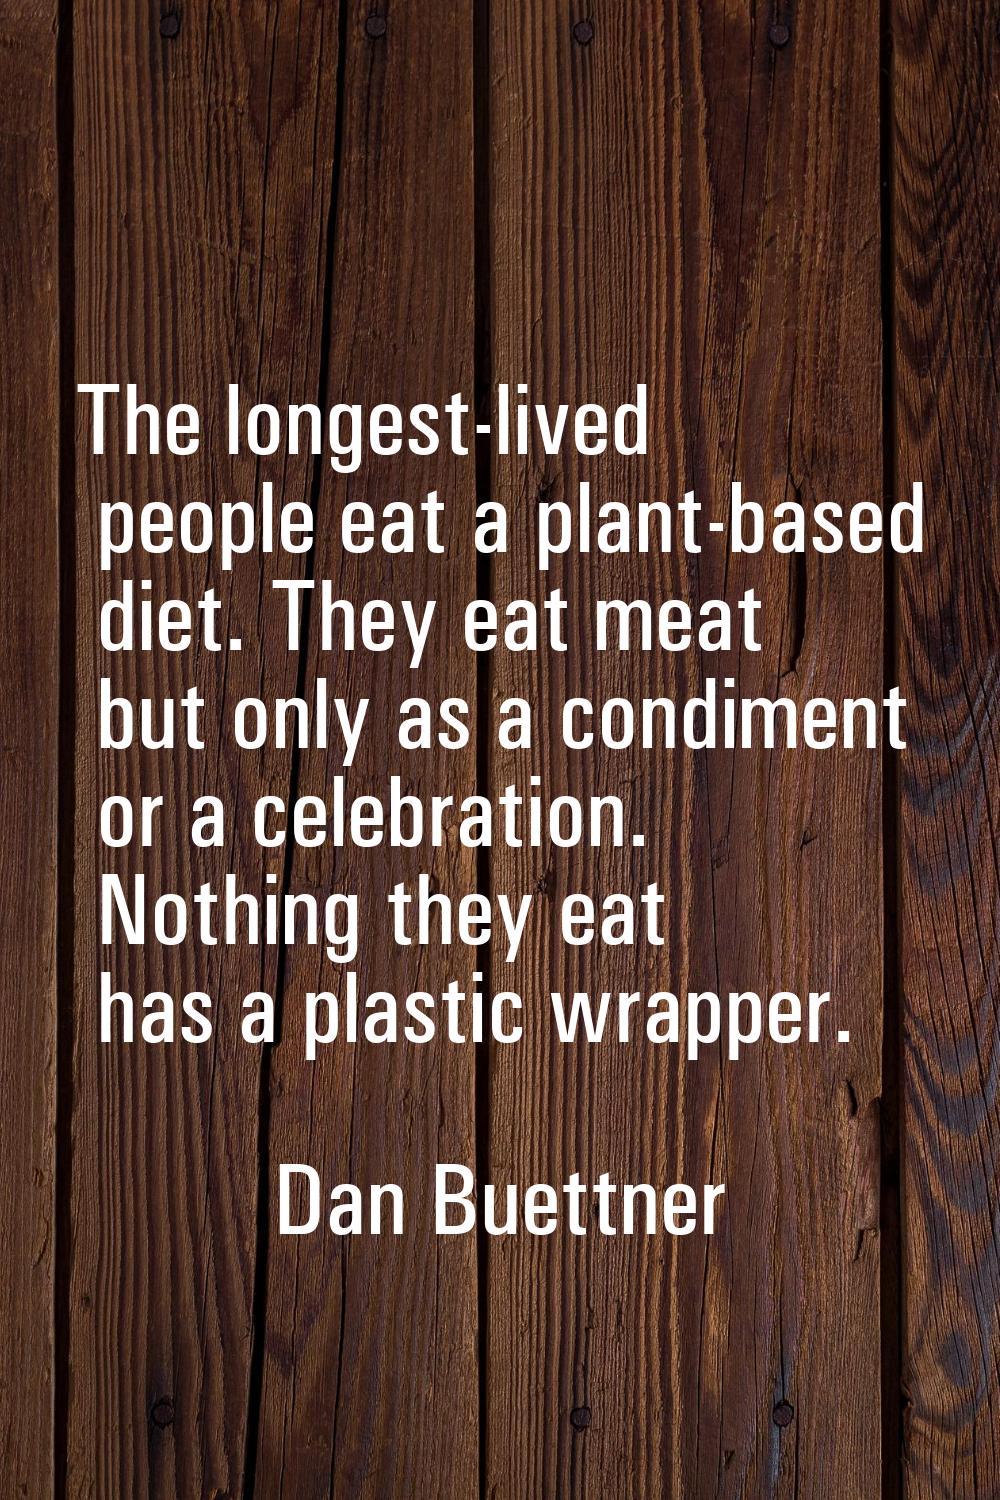 The longest-lived people eat a plant-based diet. They eat meat but only as a condiment or a celebra